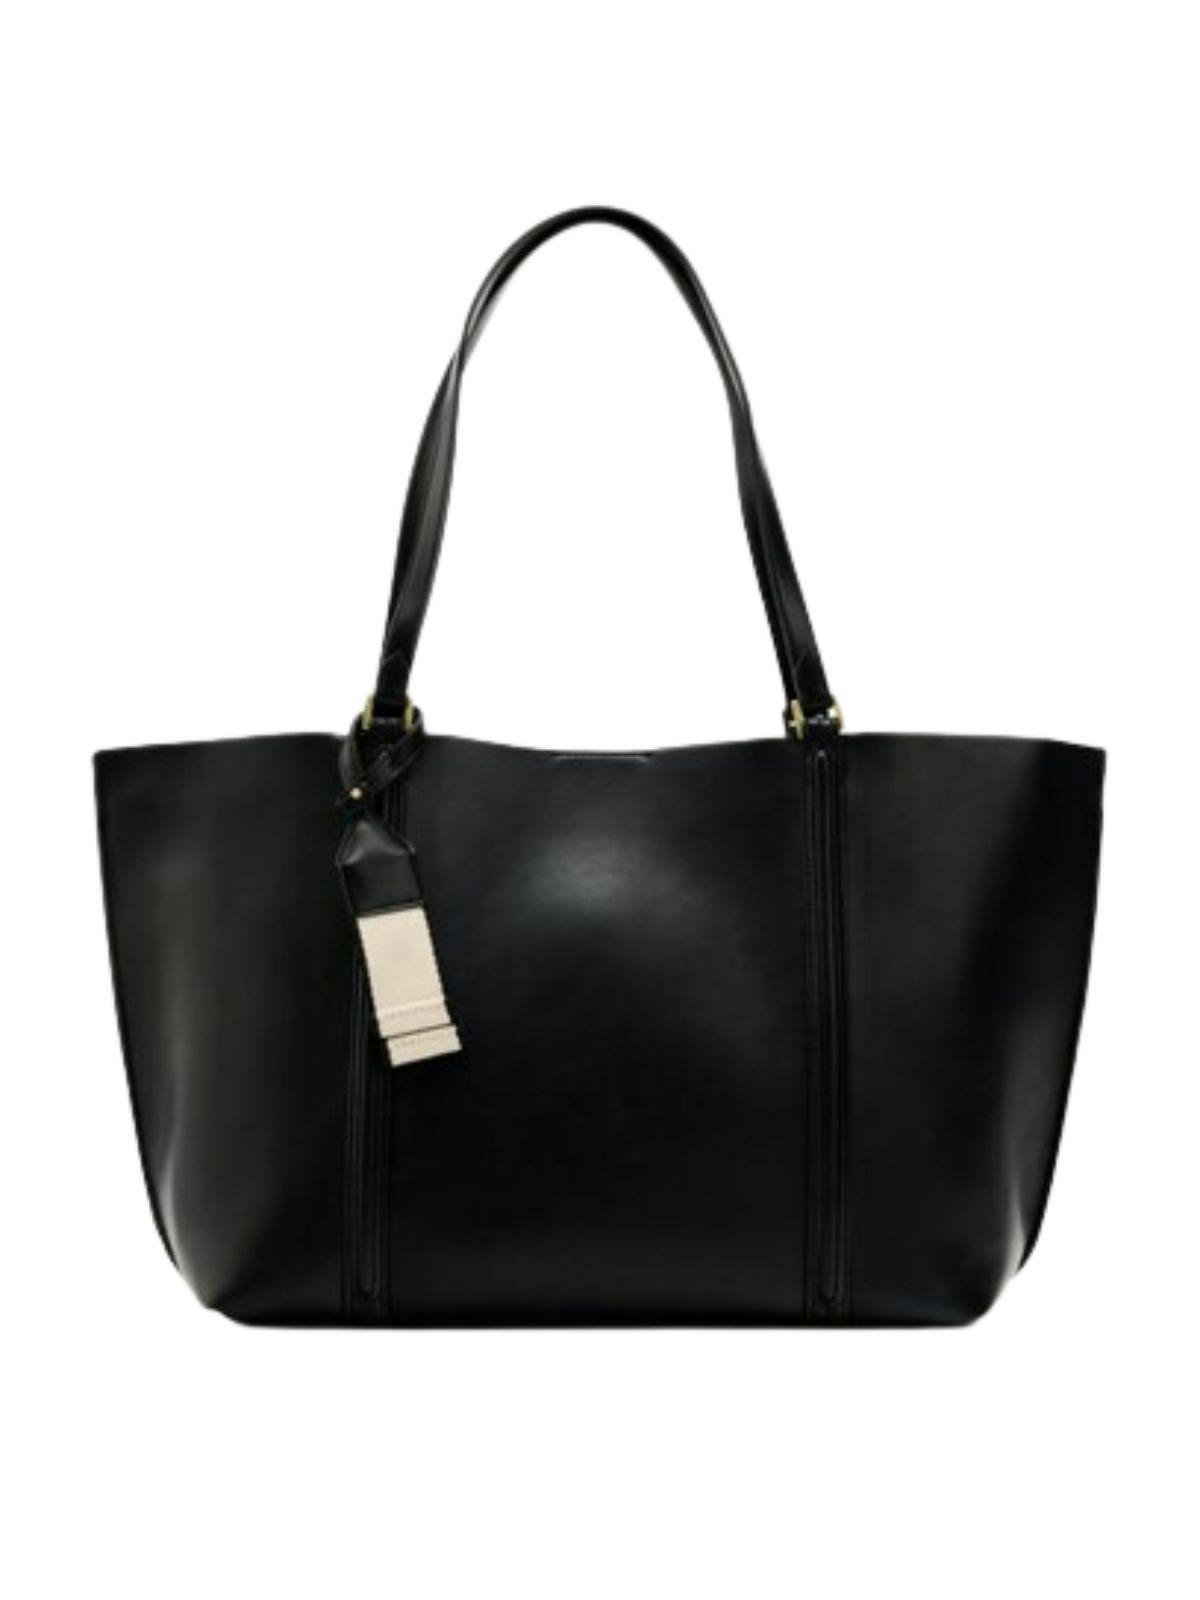 Women's Large Bags | Explore our New Arrivals | ZARA United States